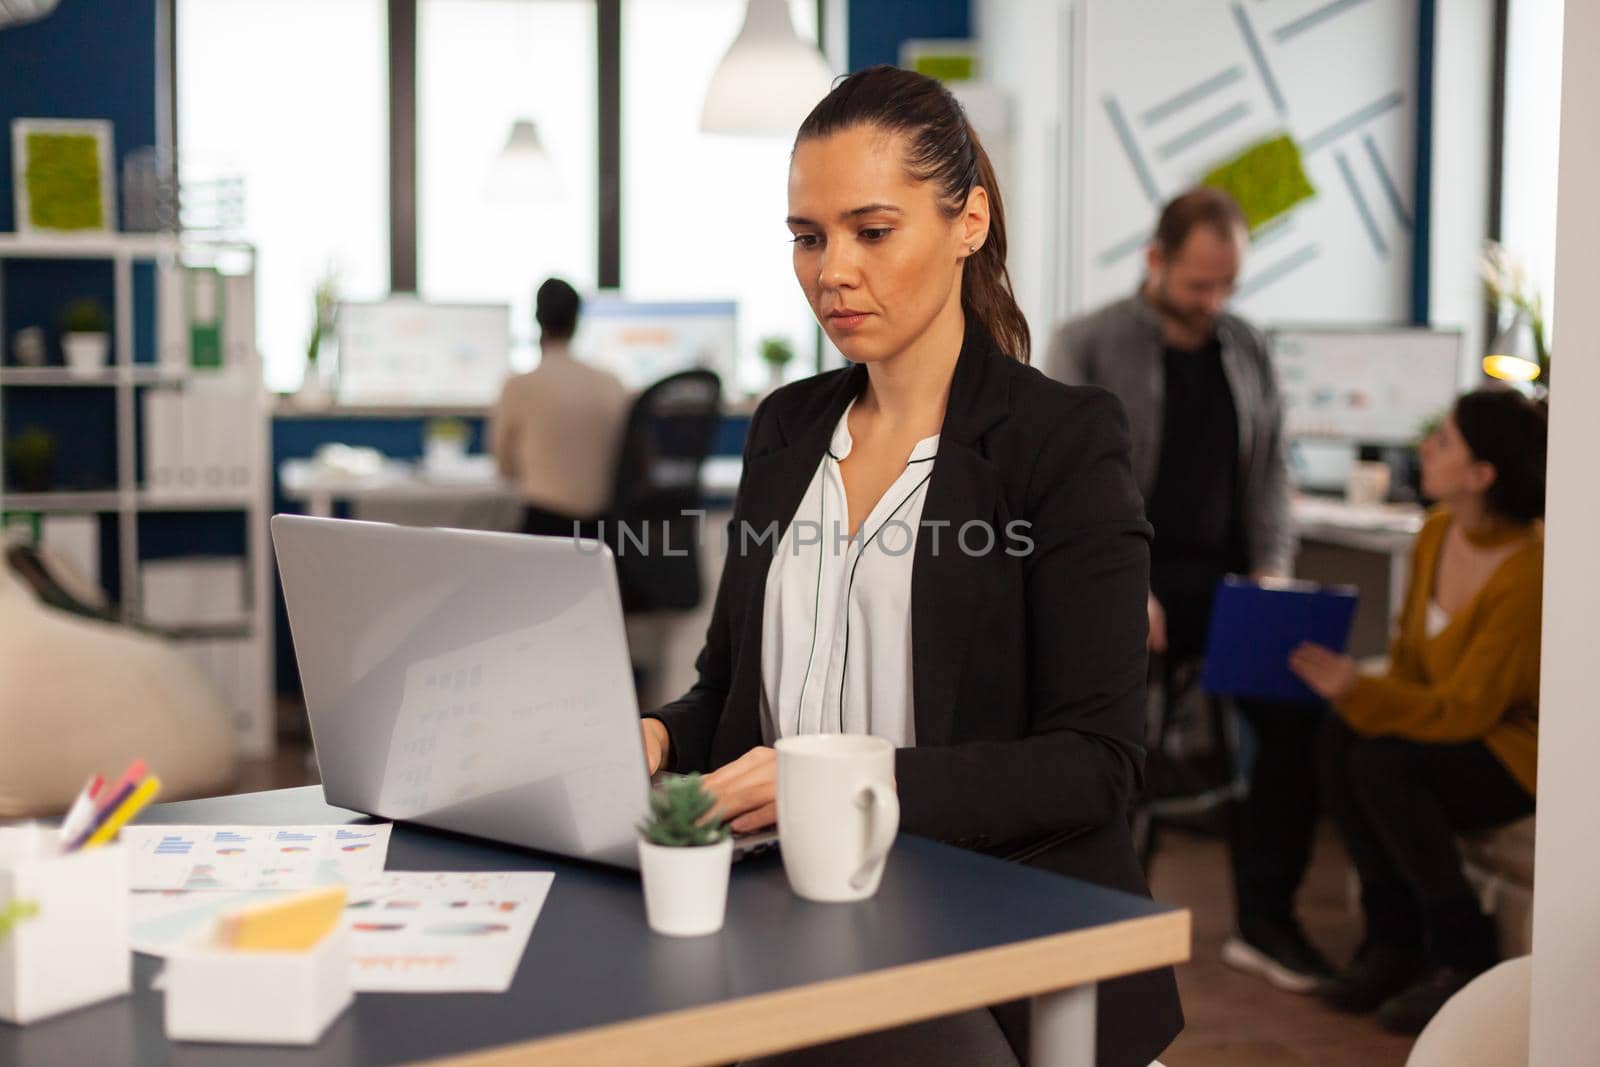 Concentrated business lady writing on laptop computer financial reports sitting at desk in busy start up office enjoying work in creative workplace. Diverse team analyzes statistics data in company